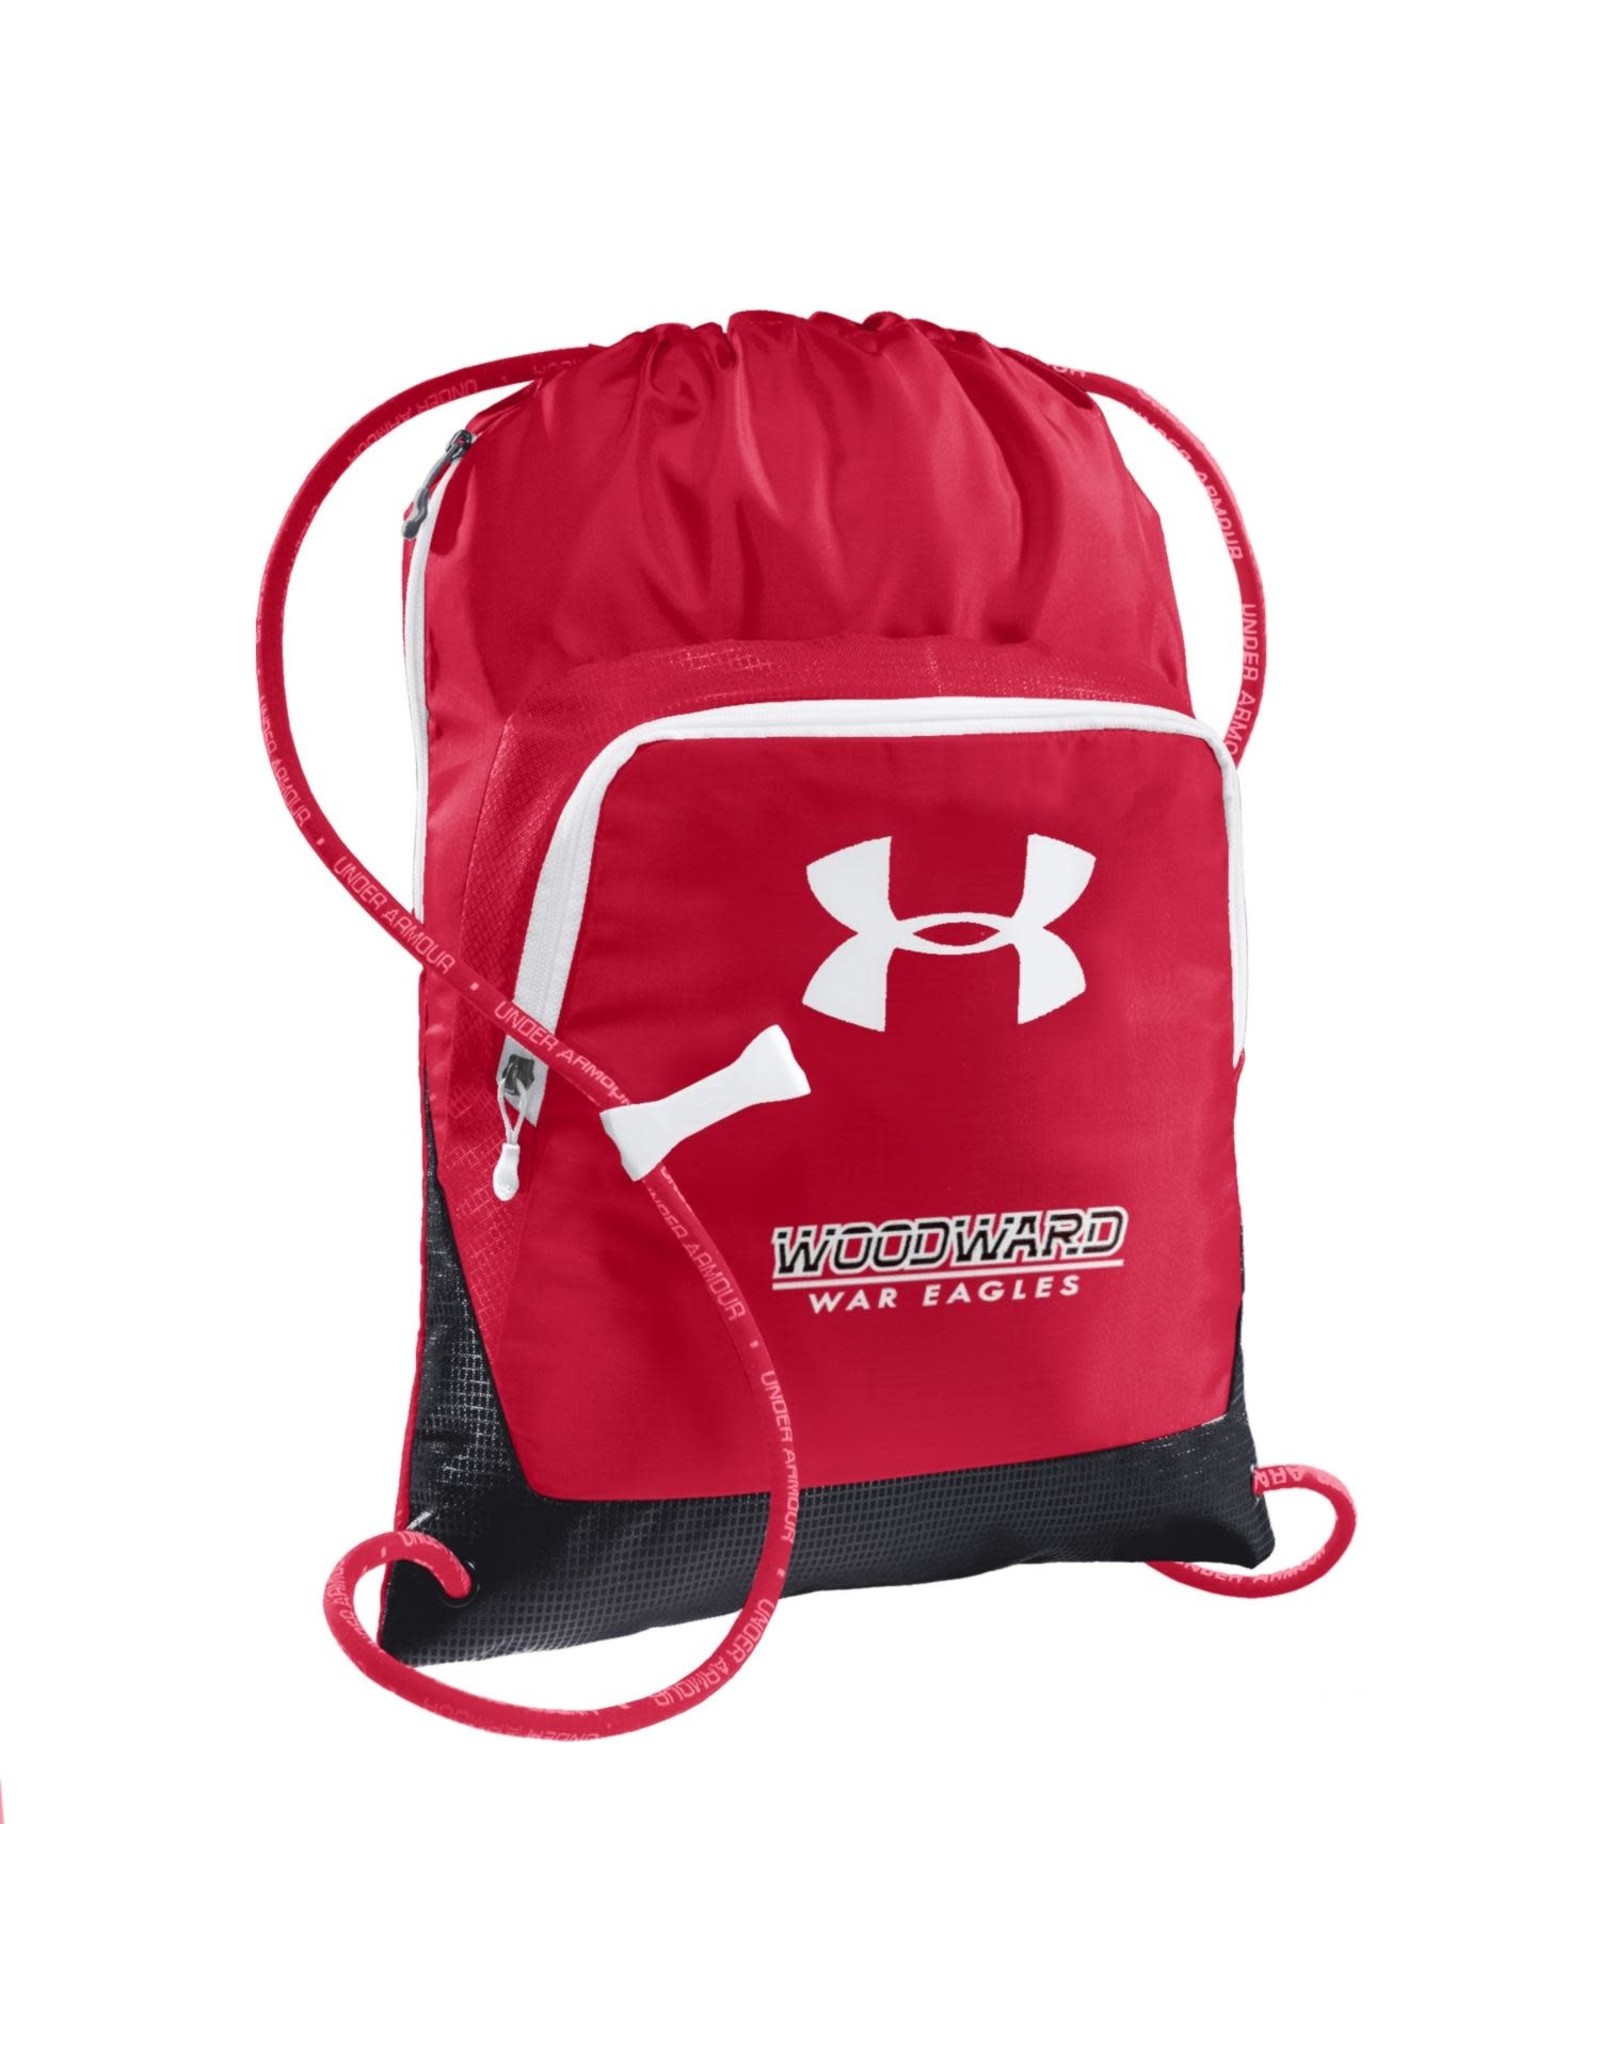 Under Armour String Bag in Red